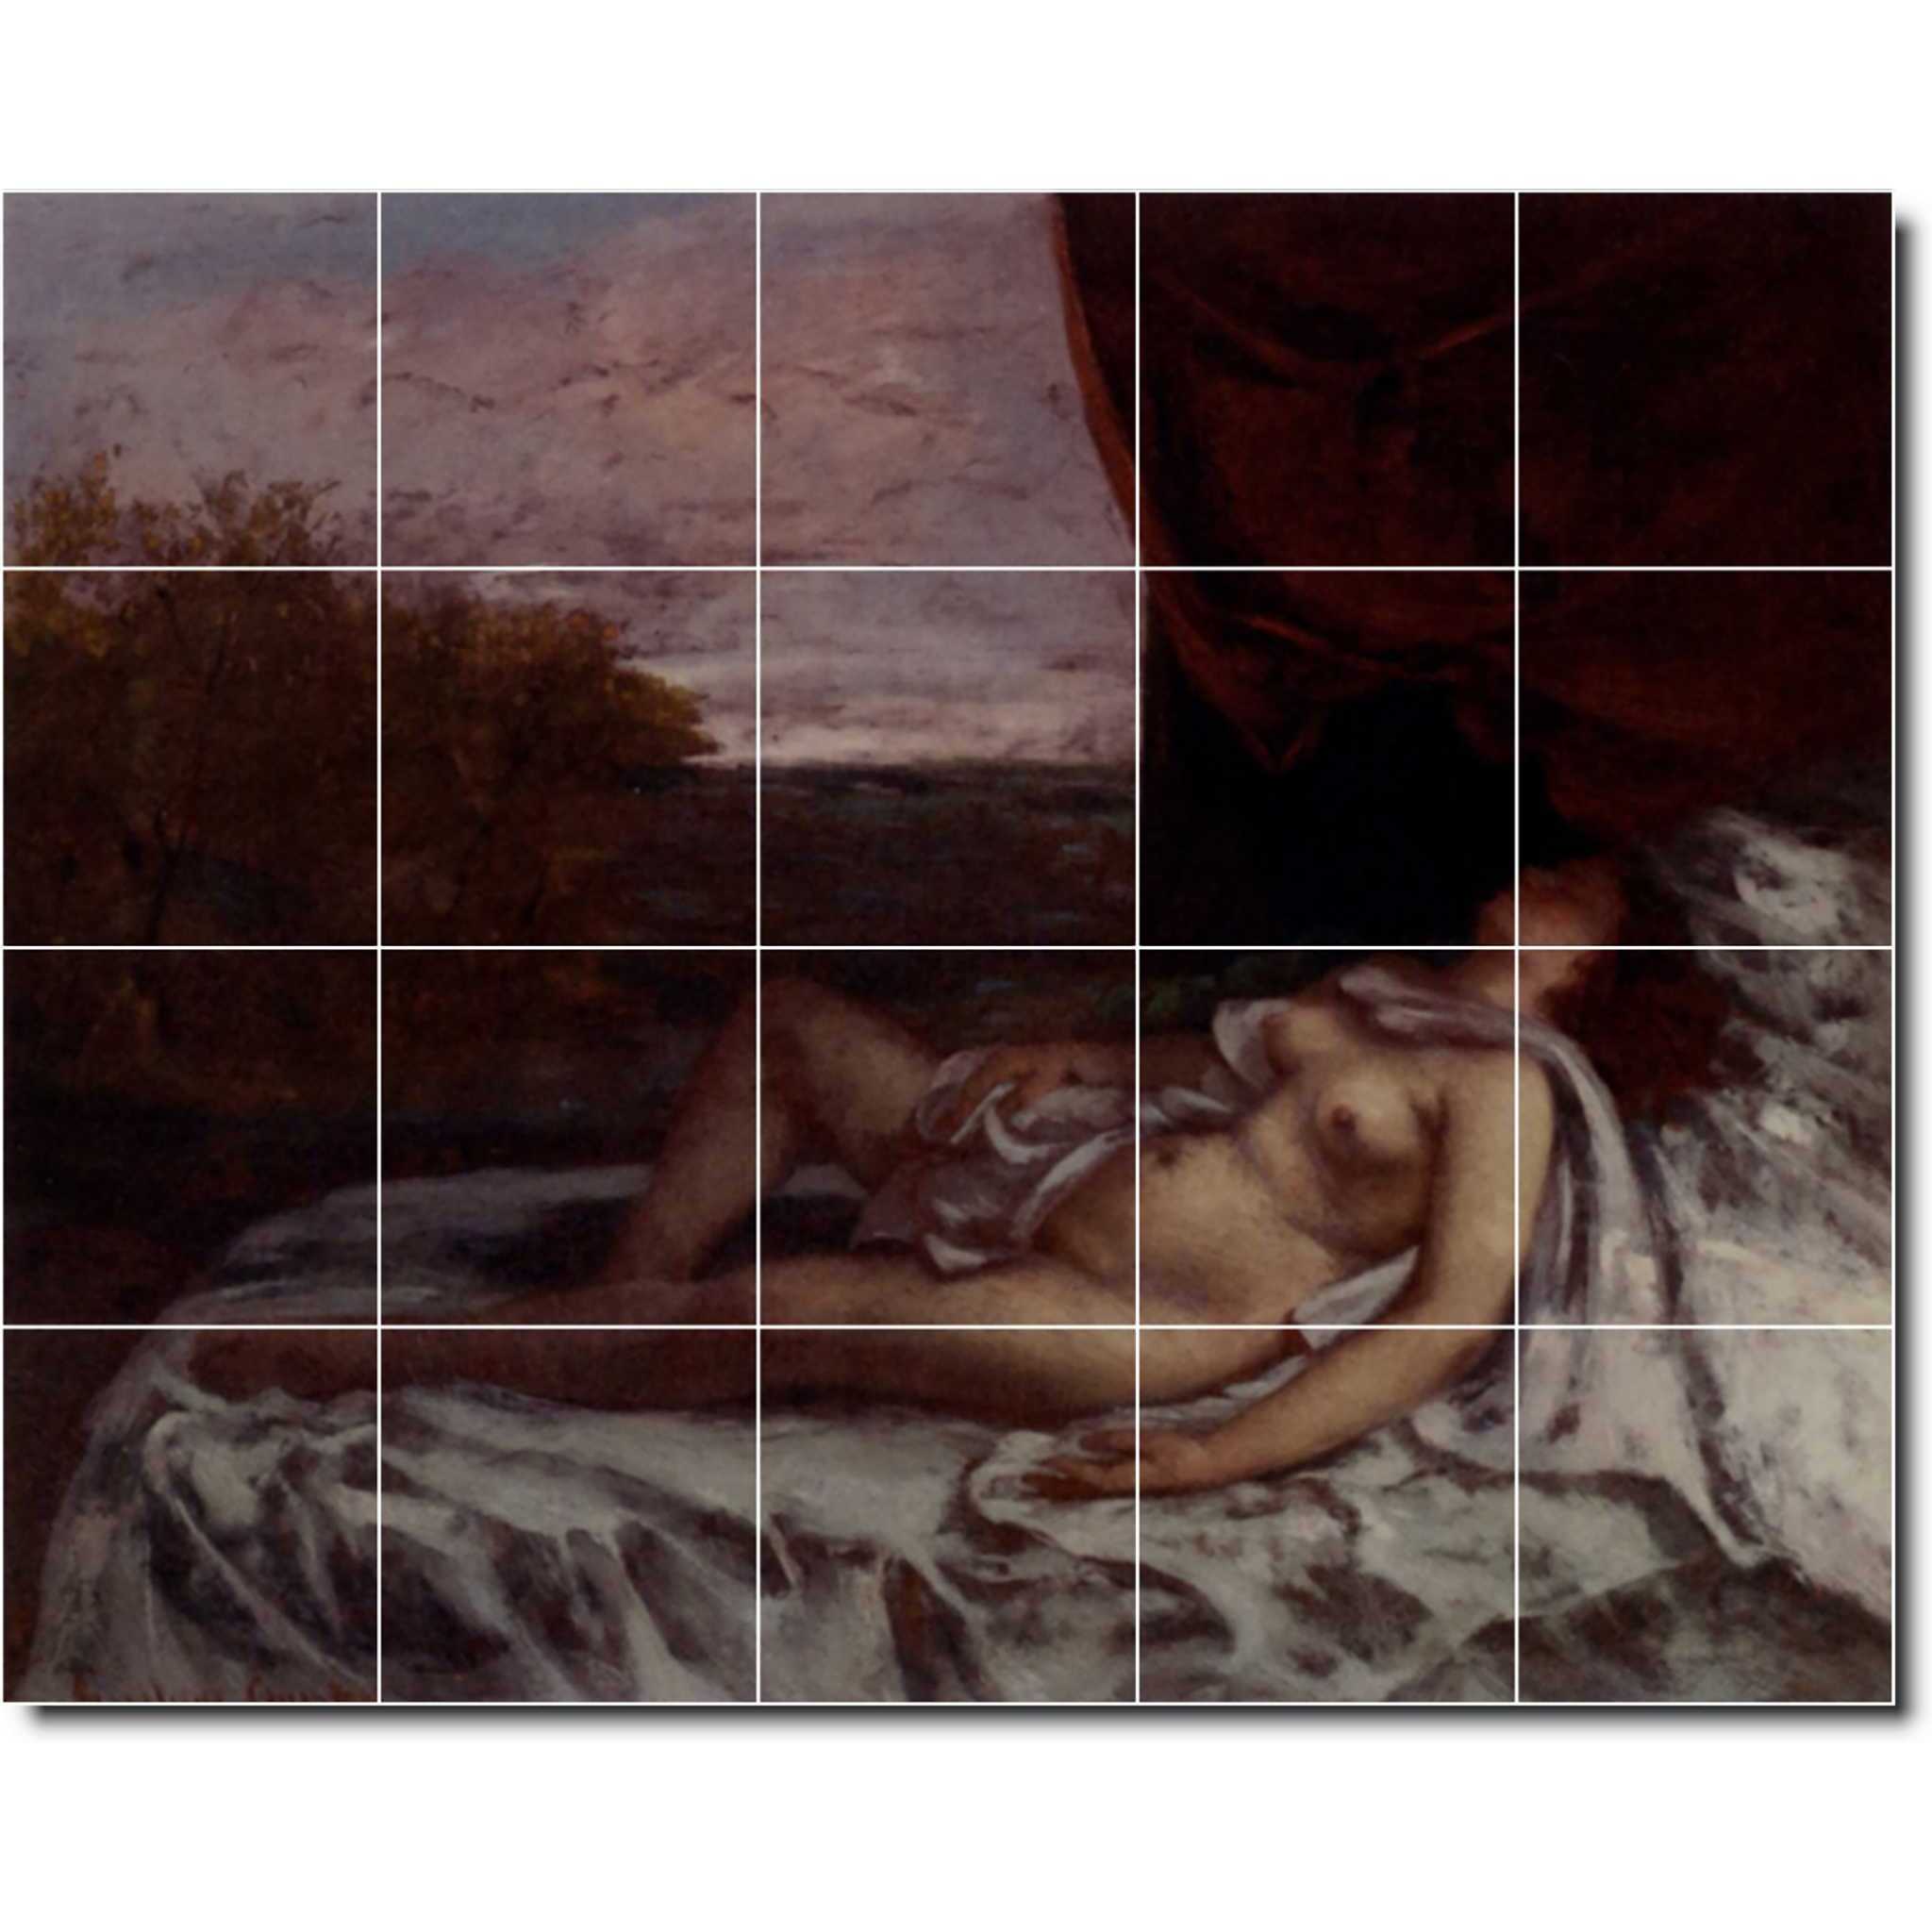 gustave courbet nude painting ceramic tile mural p02171